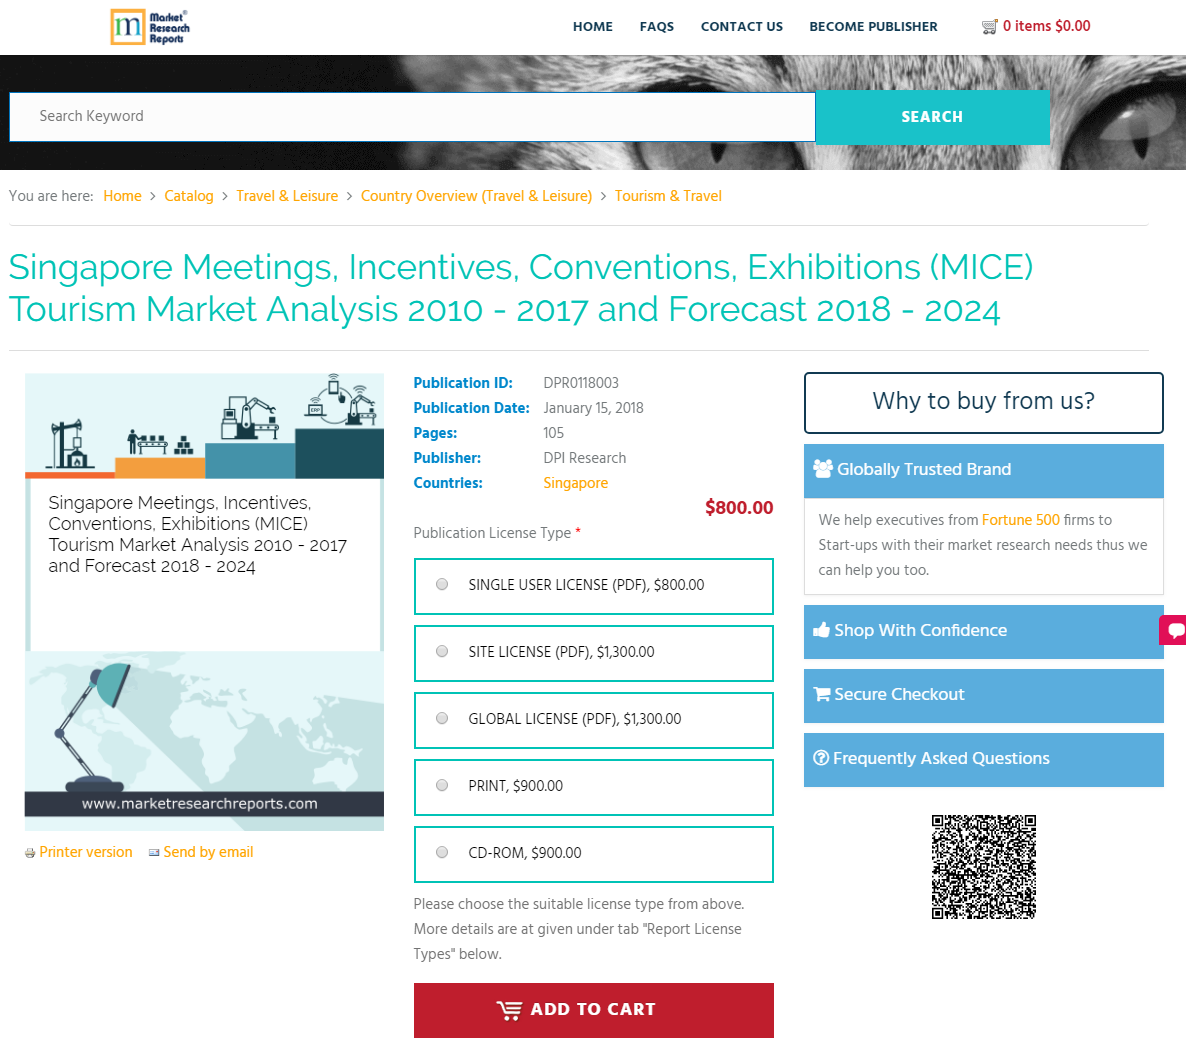 Singapore Meetings, Incentives, Conventions, Exhibitions'